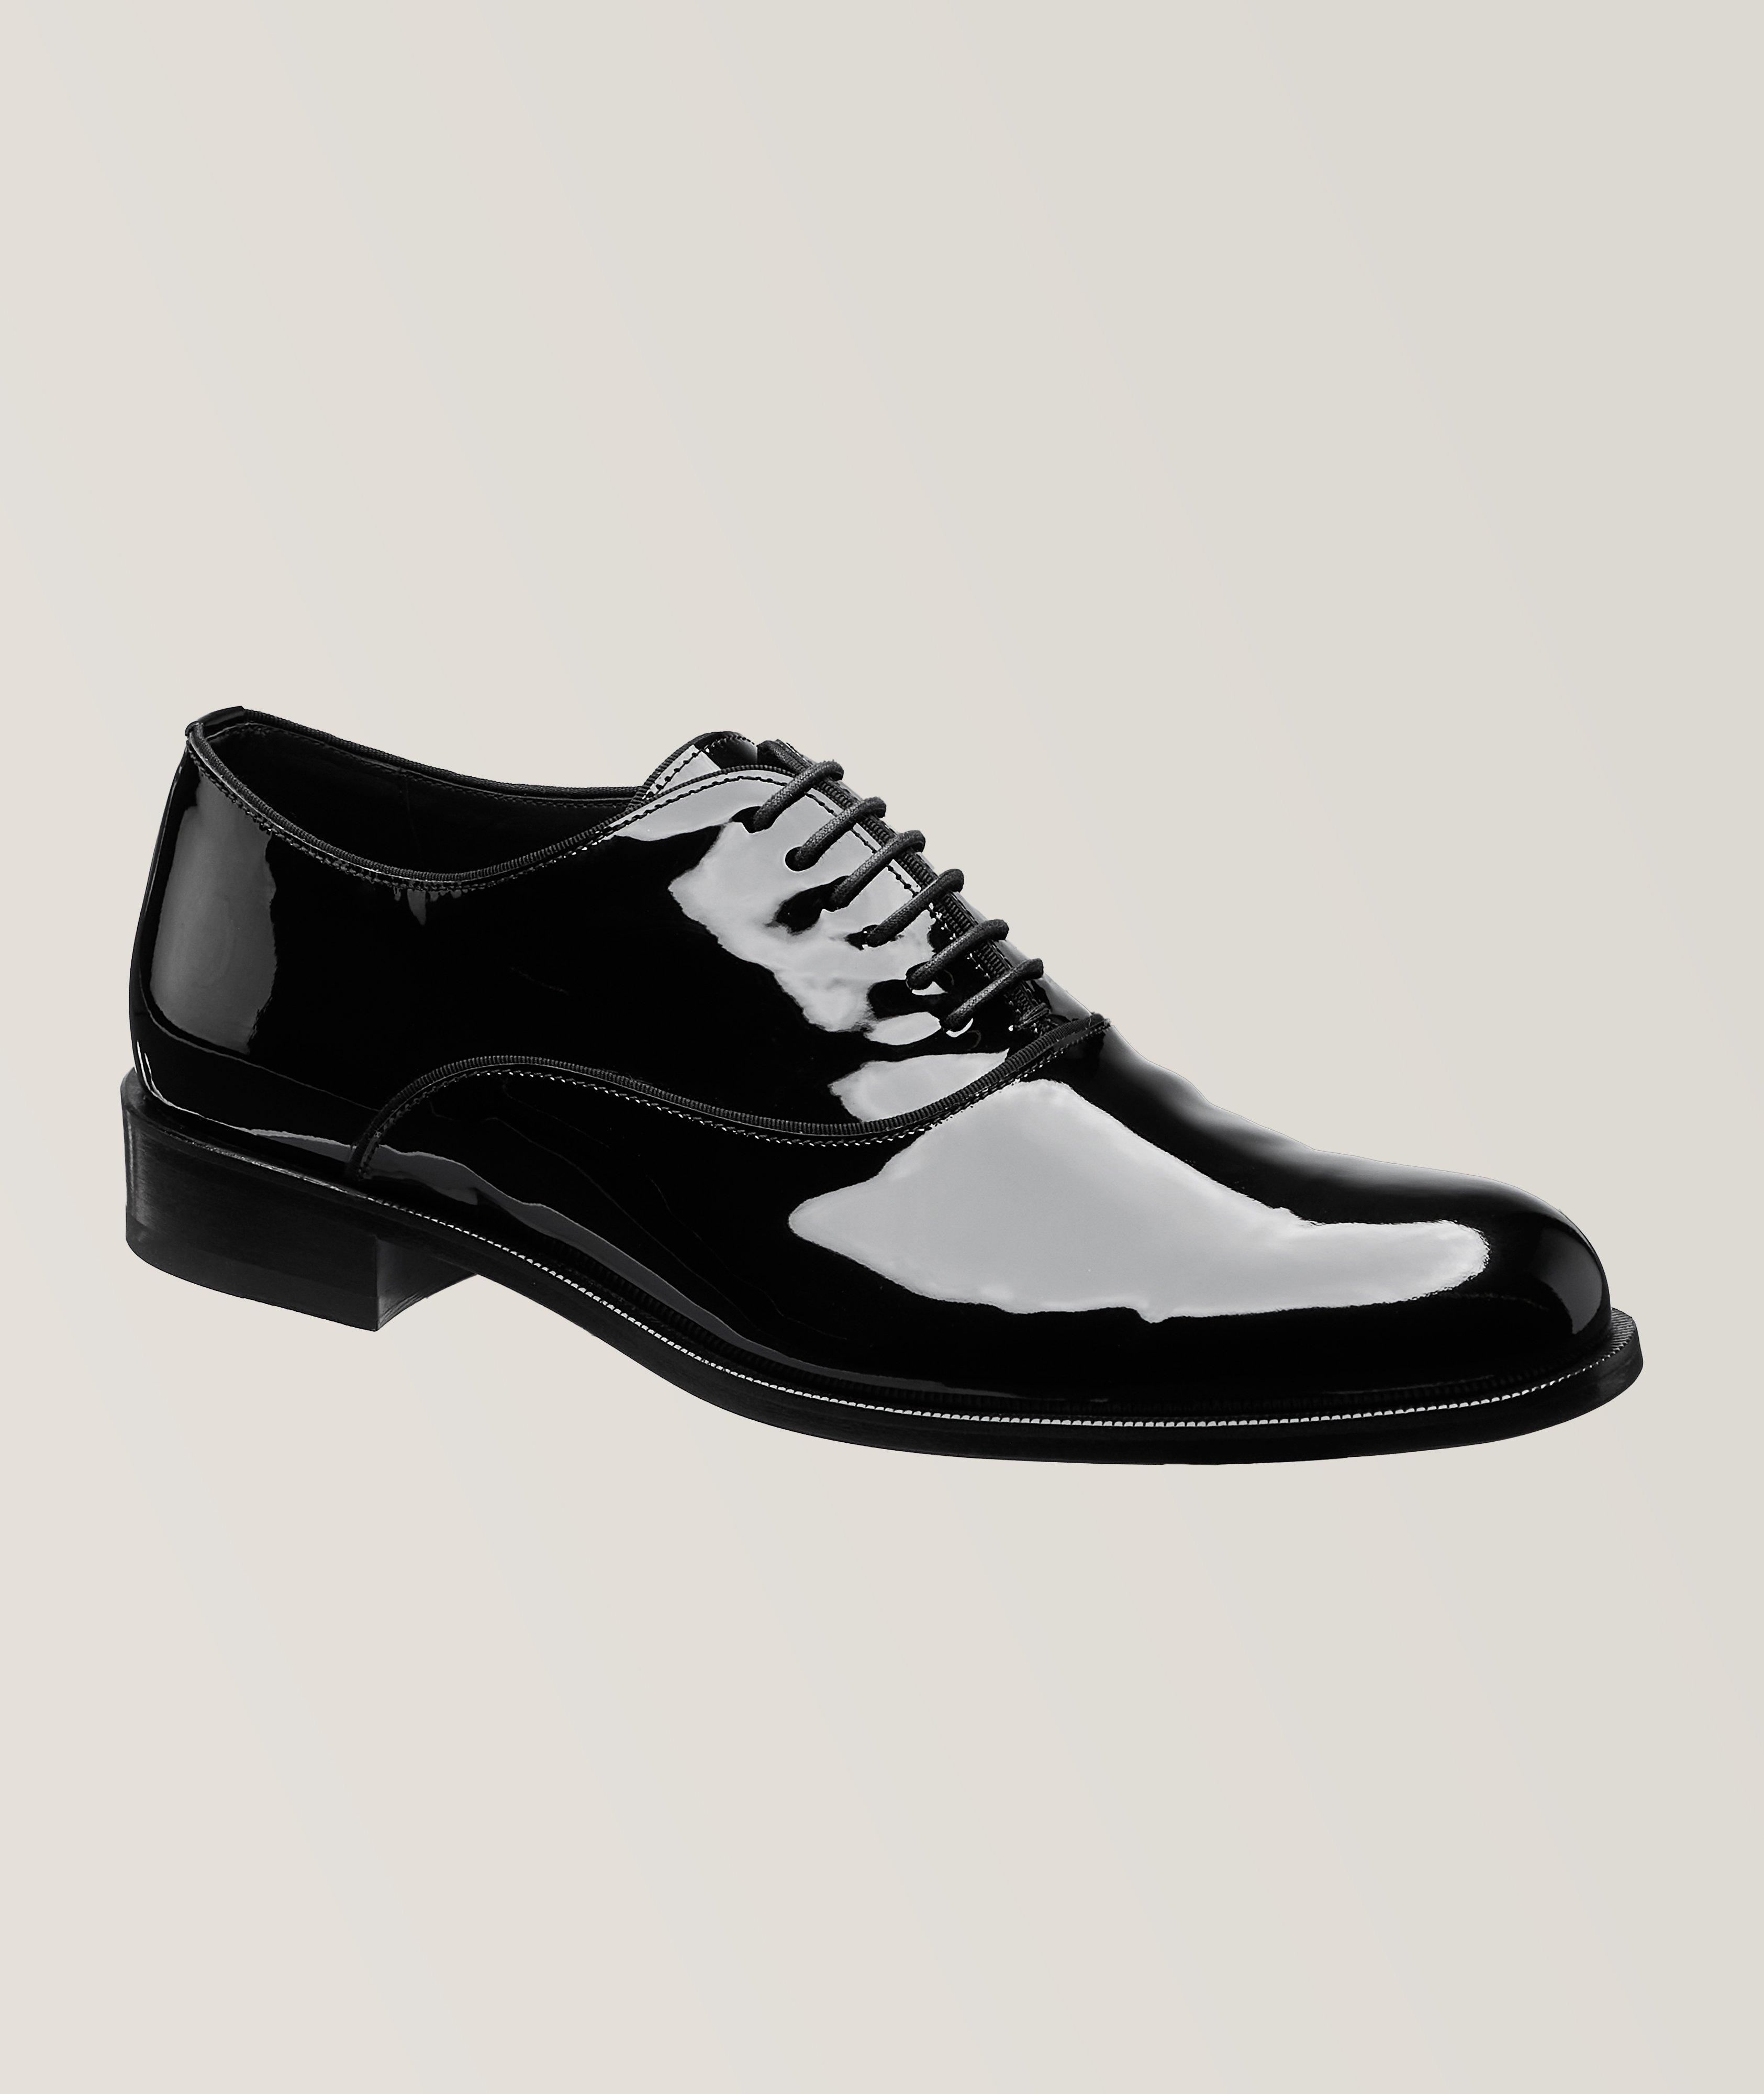 Patent Leather Derbies image 0